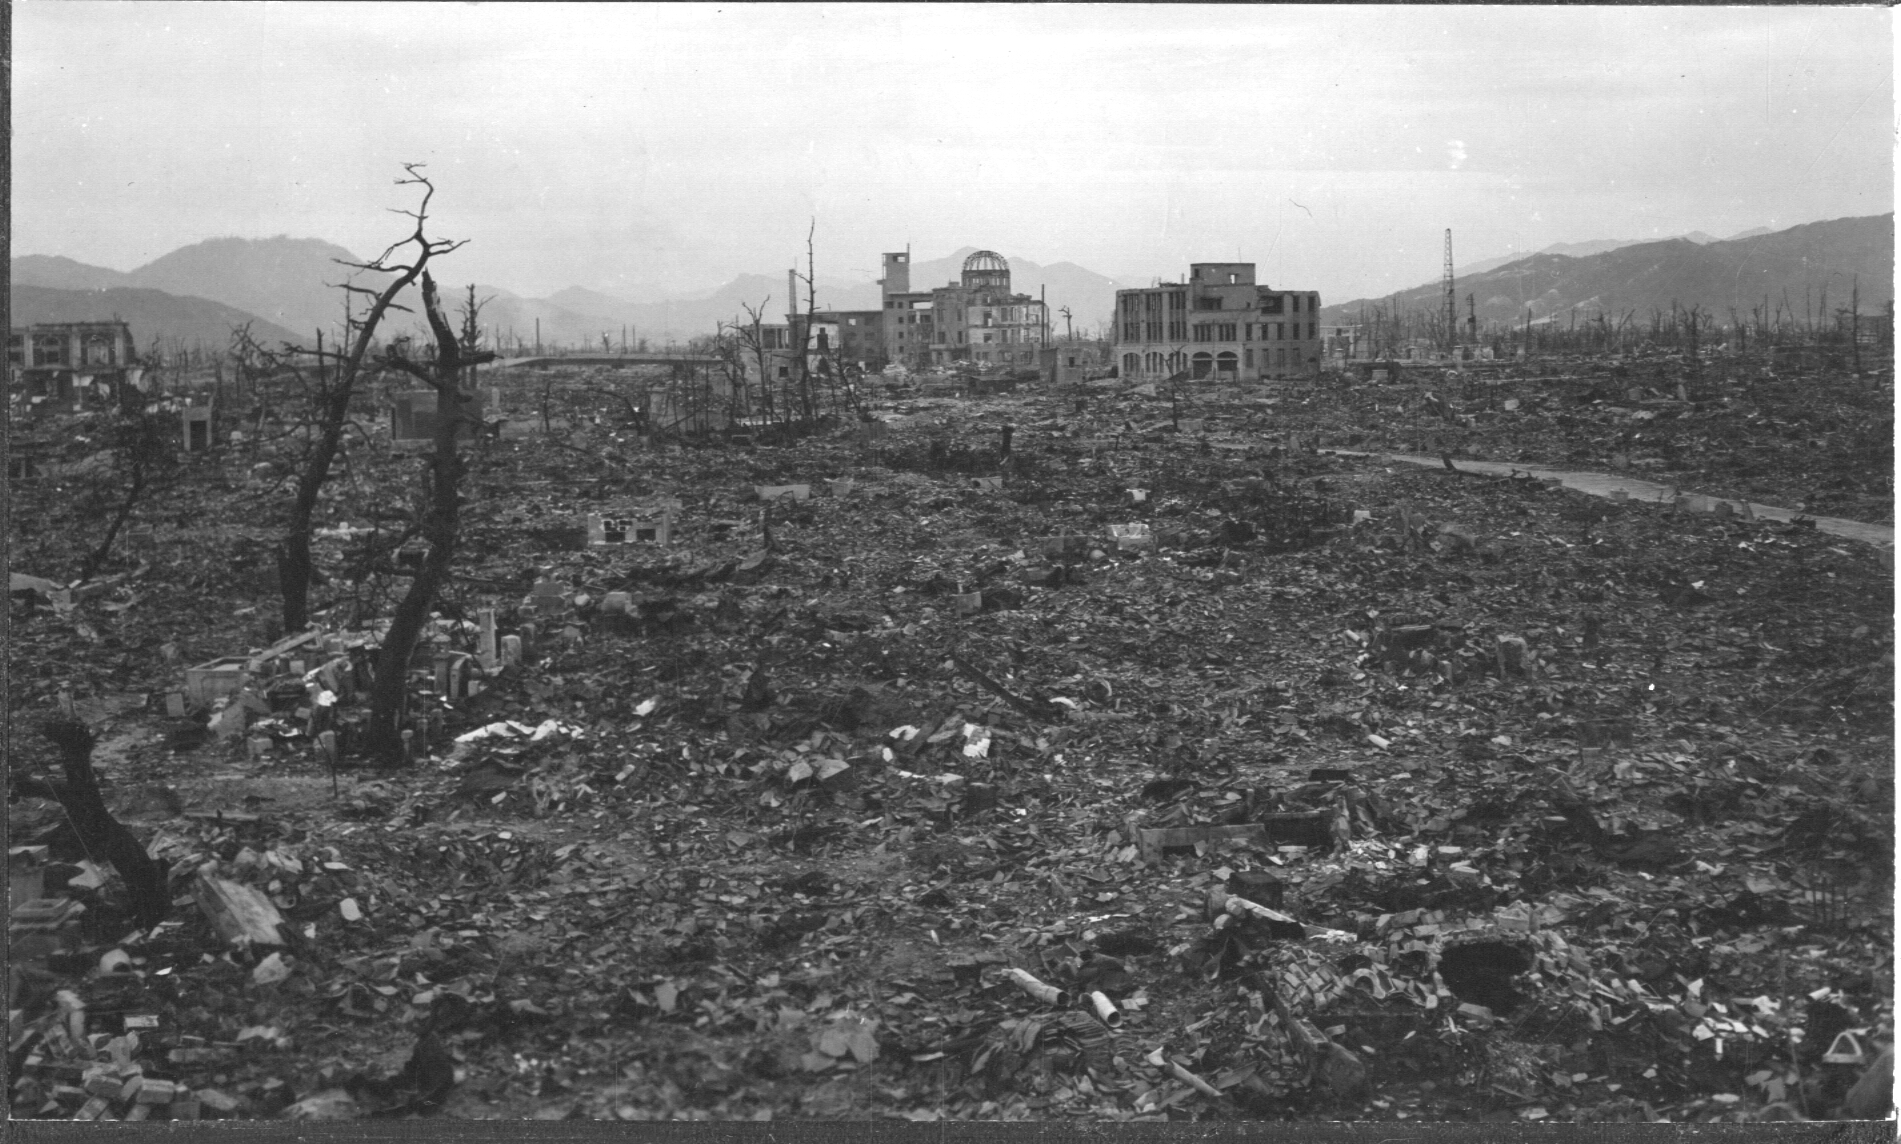 Ground photo of the destruction in Hiroshima, very few structures standing